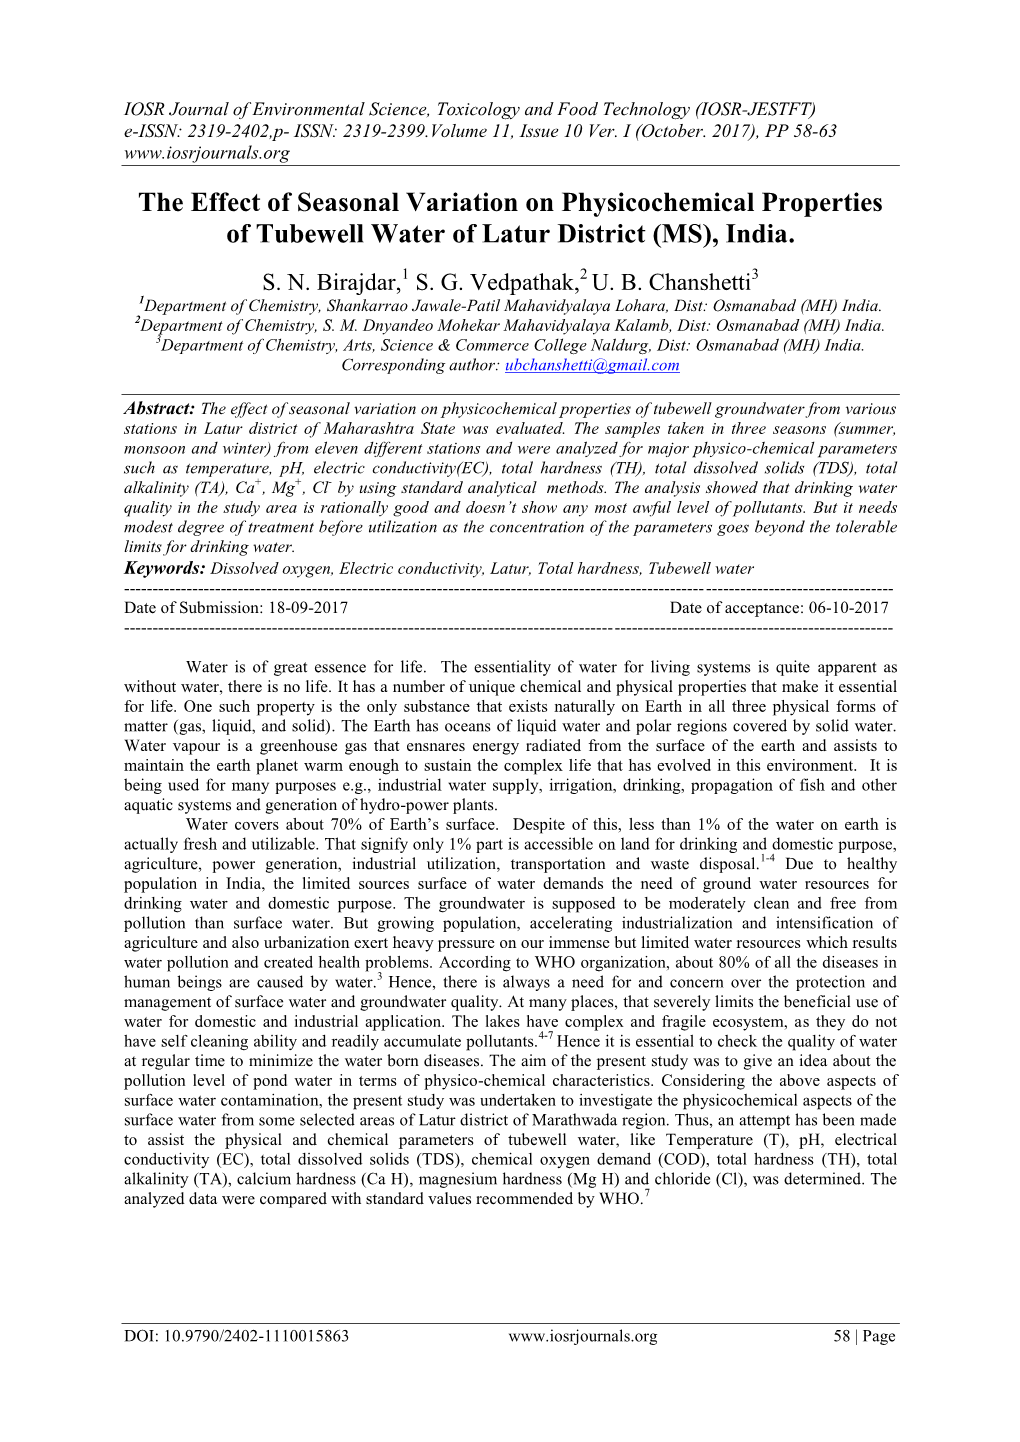 The Effect of Seasonal Variation on Physicochemical Properties of Tubewell Water of Latur District (MS), India